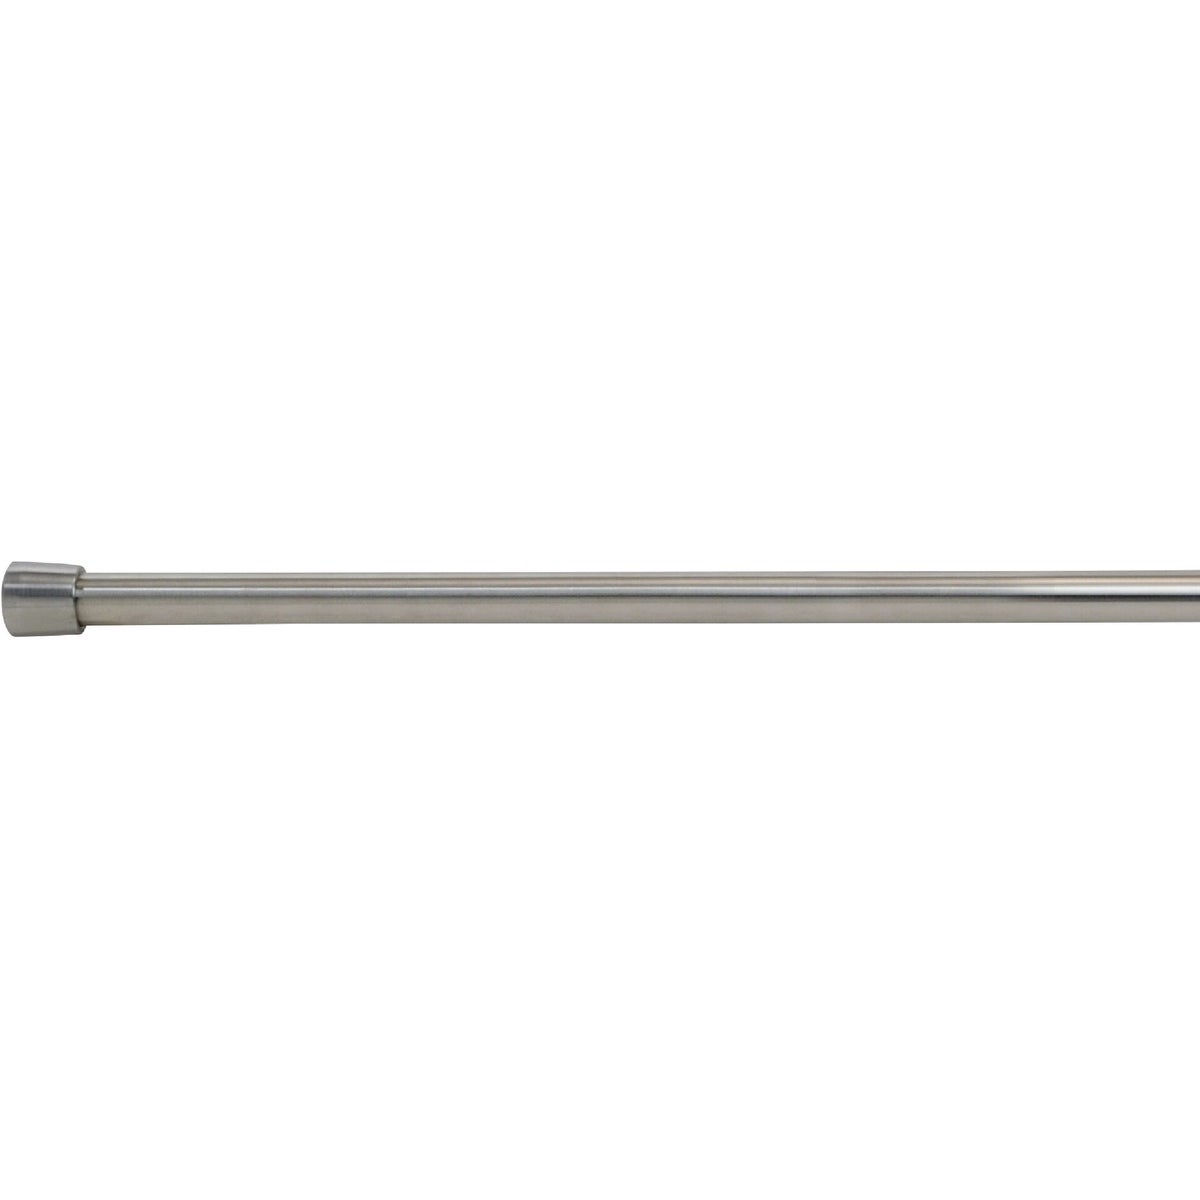 Item 638691, Forma Shower Curtain Tension Rod is strong, attractive and reliable.